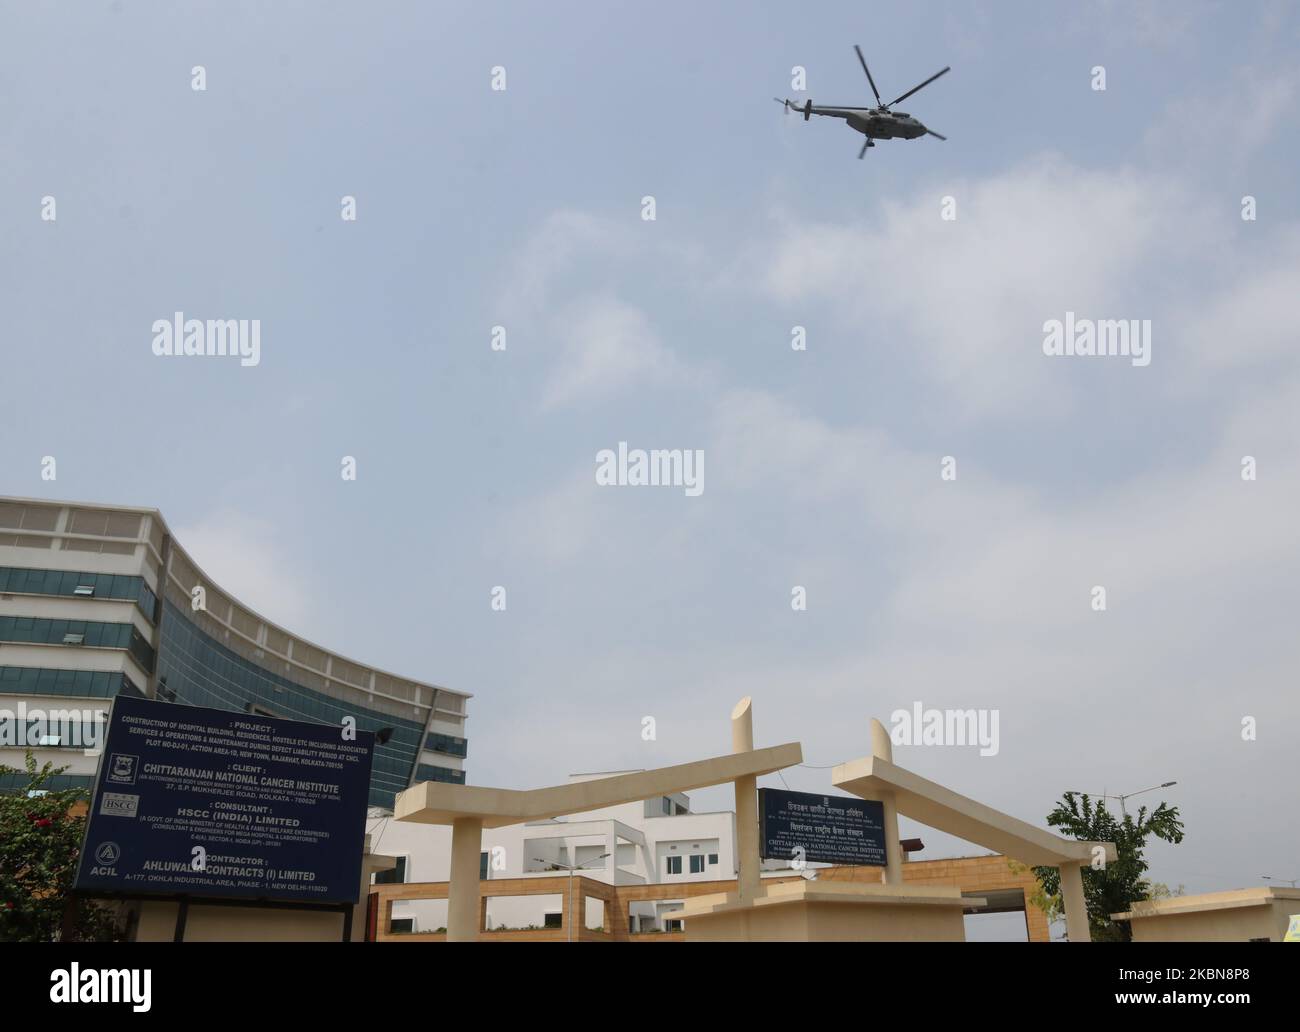 An Indian Air Force (IAF) Mi-17 helicopter drops flower petals as it flies over the Chittaranjan Cancer Institute to pay tribute to those involved in the fight against the spread of the COVID-19 coronavirus in Kolkata , India, Sunday, May 3, 2020. The event was part the Armed Forces' efforts to thank the workers, including doctors, nurses and police personnel, who have been at the forefront of the country's battle against the COVID-19 pandemic. (Photo by Debajyoti Chakraborty/NurPhoto) Stock Photo